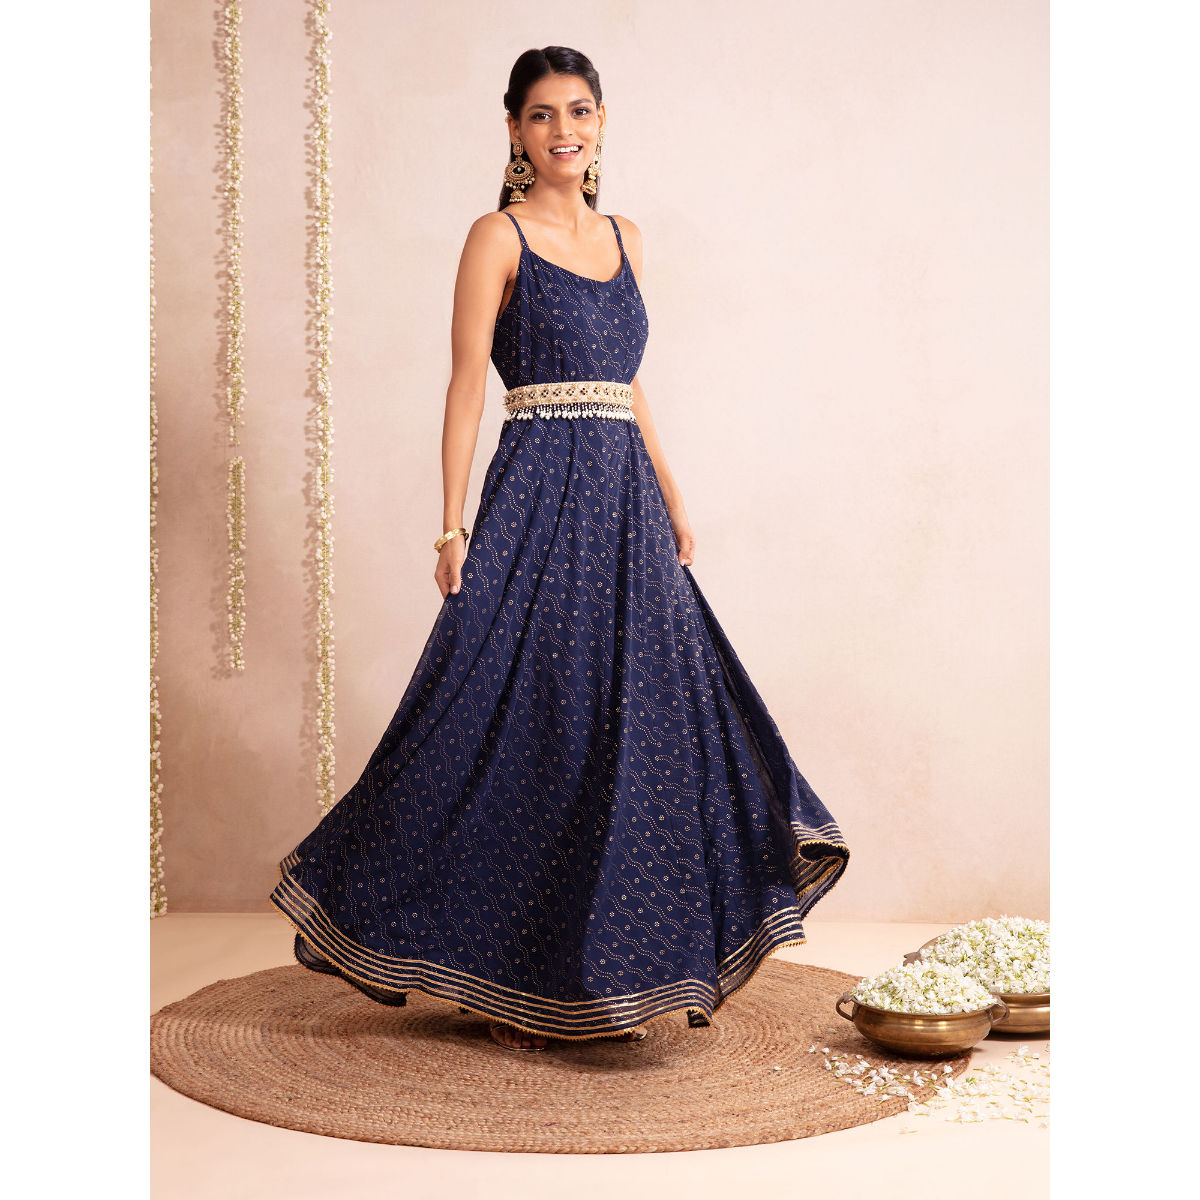 Update 77+ navy blue gown images best